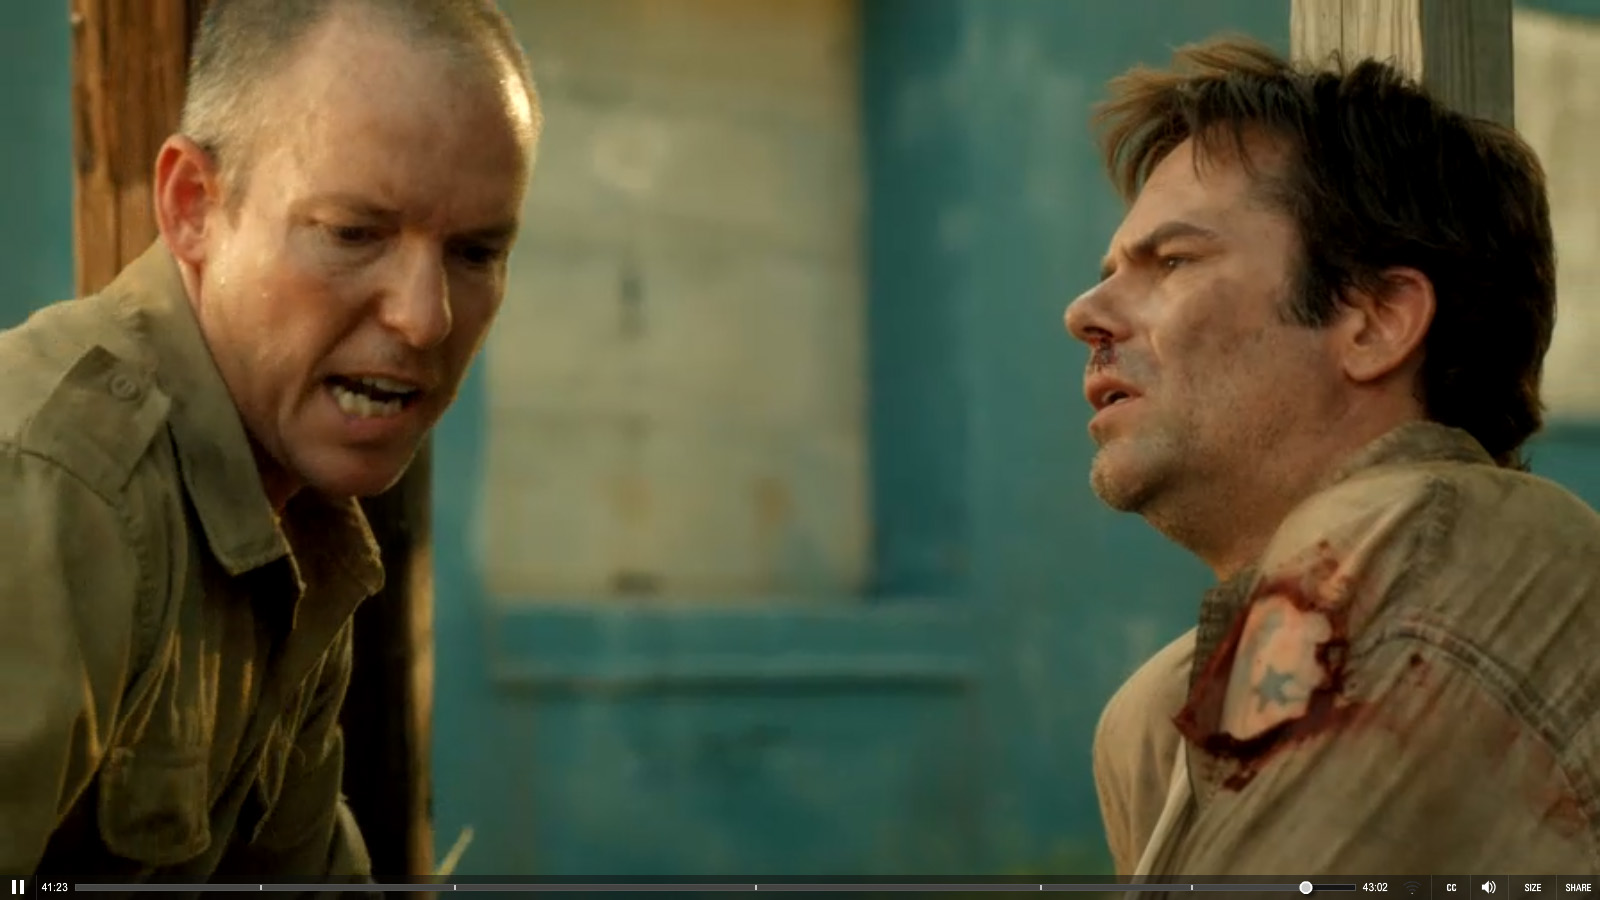 From the 'Love Story' ep of NBC's Revolution.